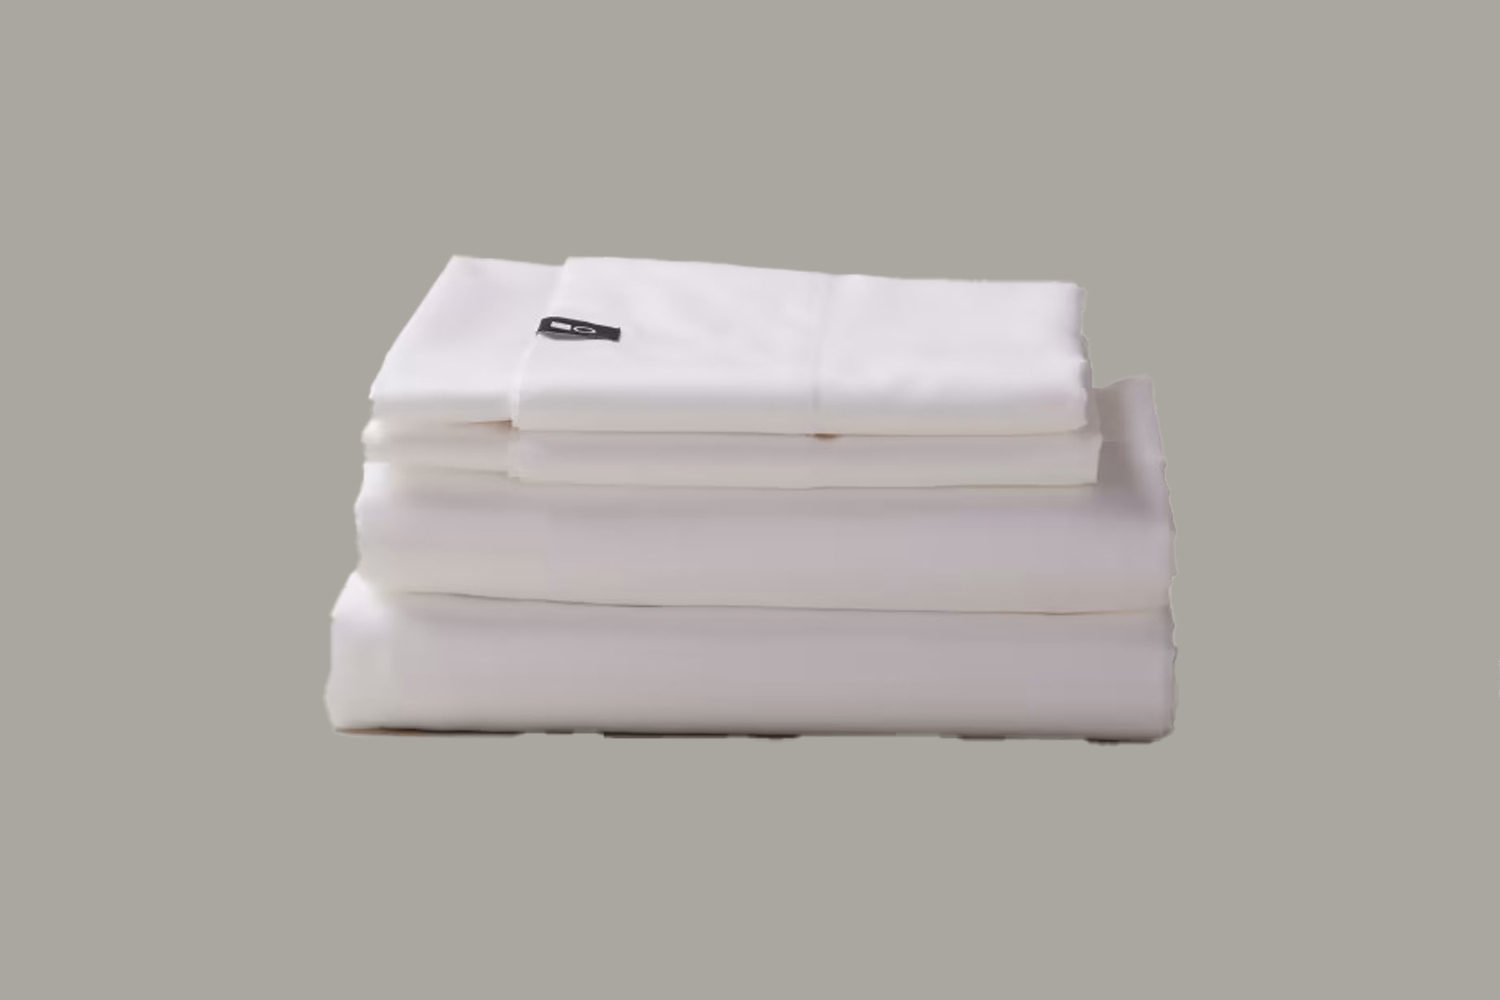 The LifeLabs CoolLife Sheet Set is the perfect sheet set in the midst of summer for warm weather in 2022